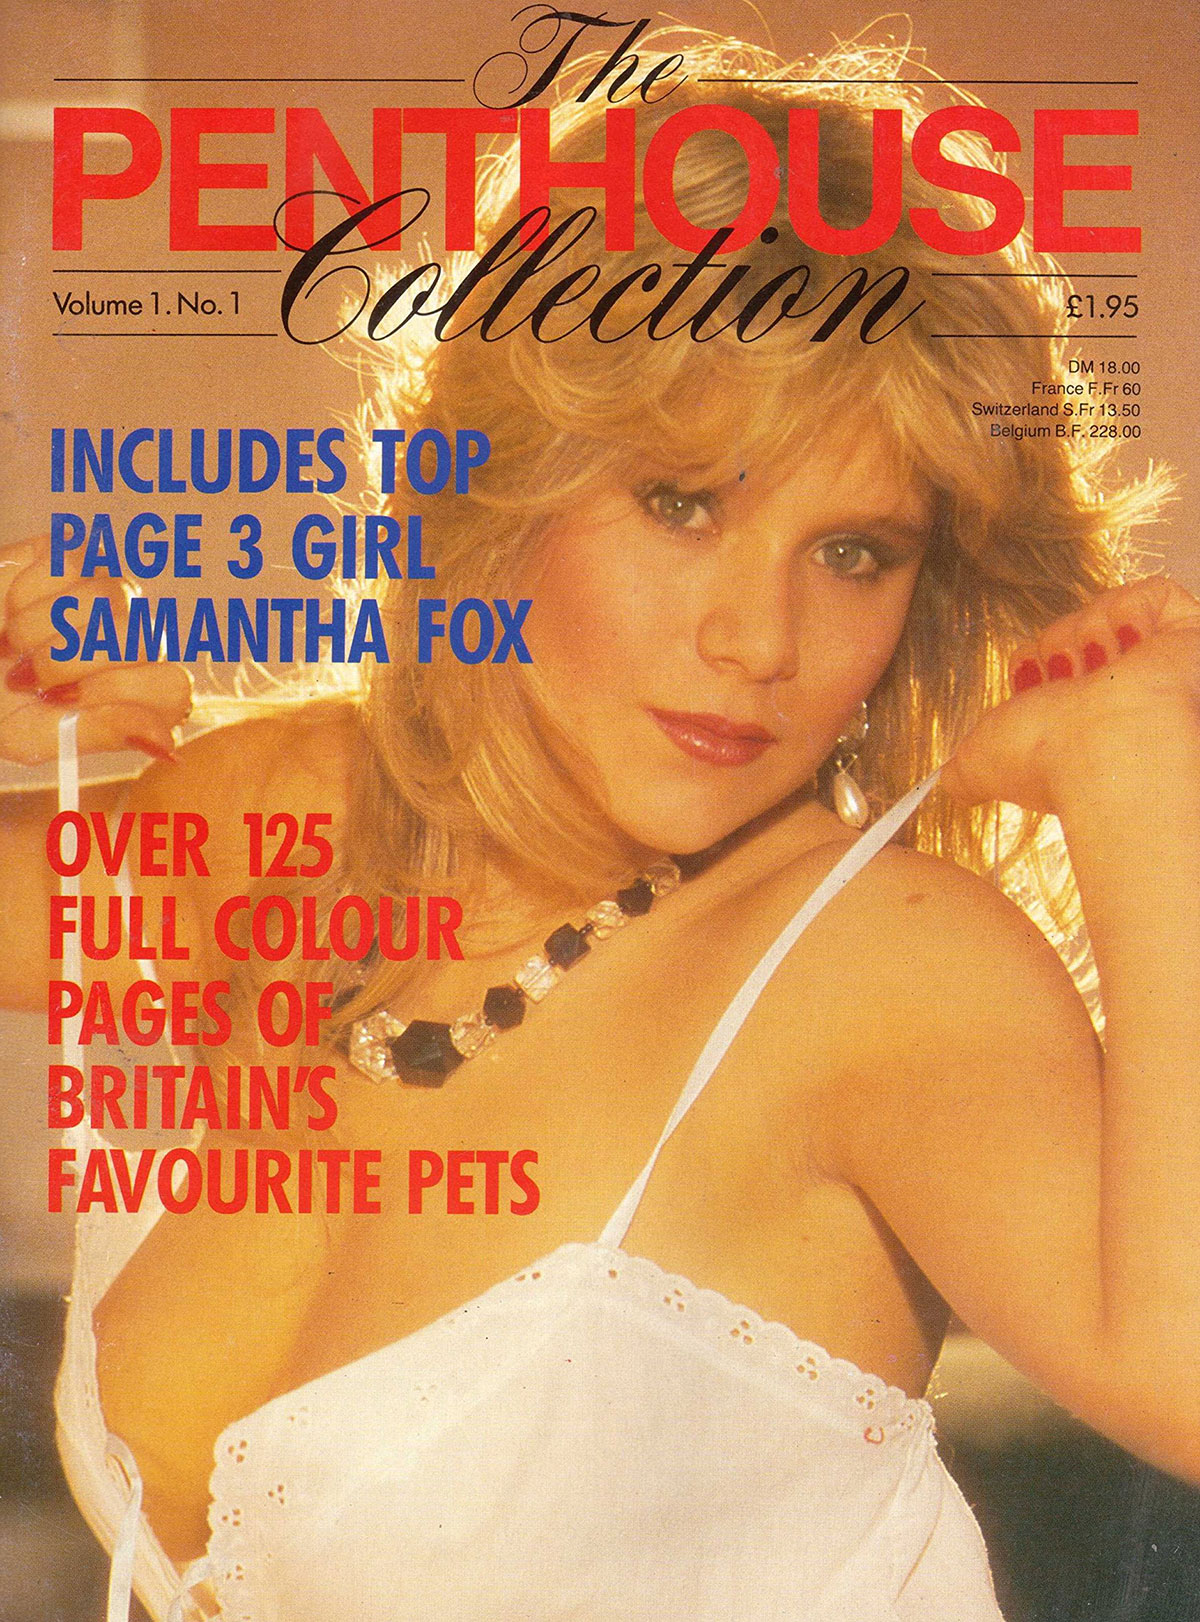 Penthouse Collection Vol. 1 # 1 magazine back issue Penthouse Collection magizine back copy Penthouse Collection Vol. 1 # 1 Magazine Back Issue Published by Penthouse Publishing, Bob Guccione. Covergirl Samantha Fox.